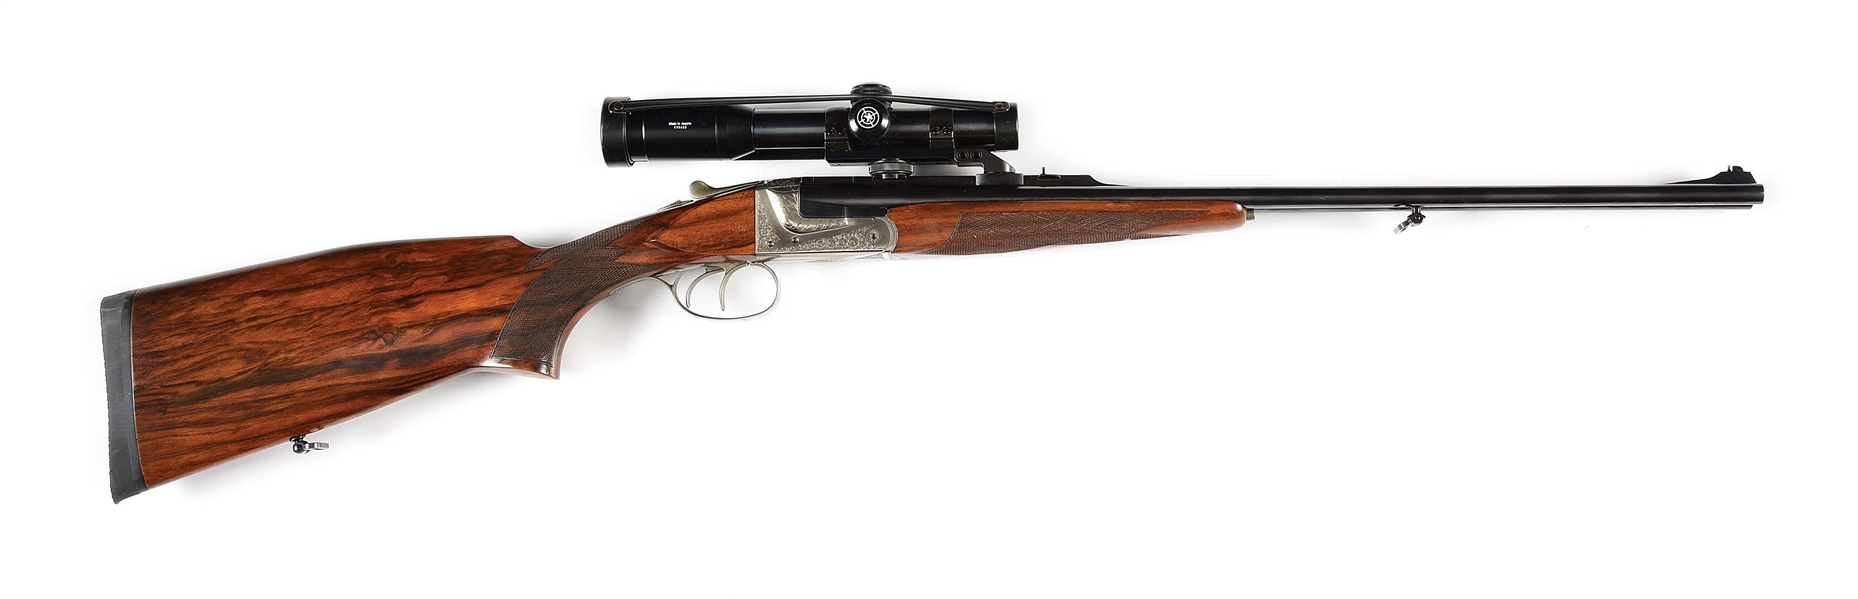 (C) GAUCHER 9.3X74R DOUBLE RIFLE WITH SCOPE.